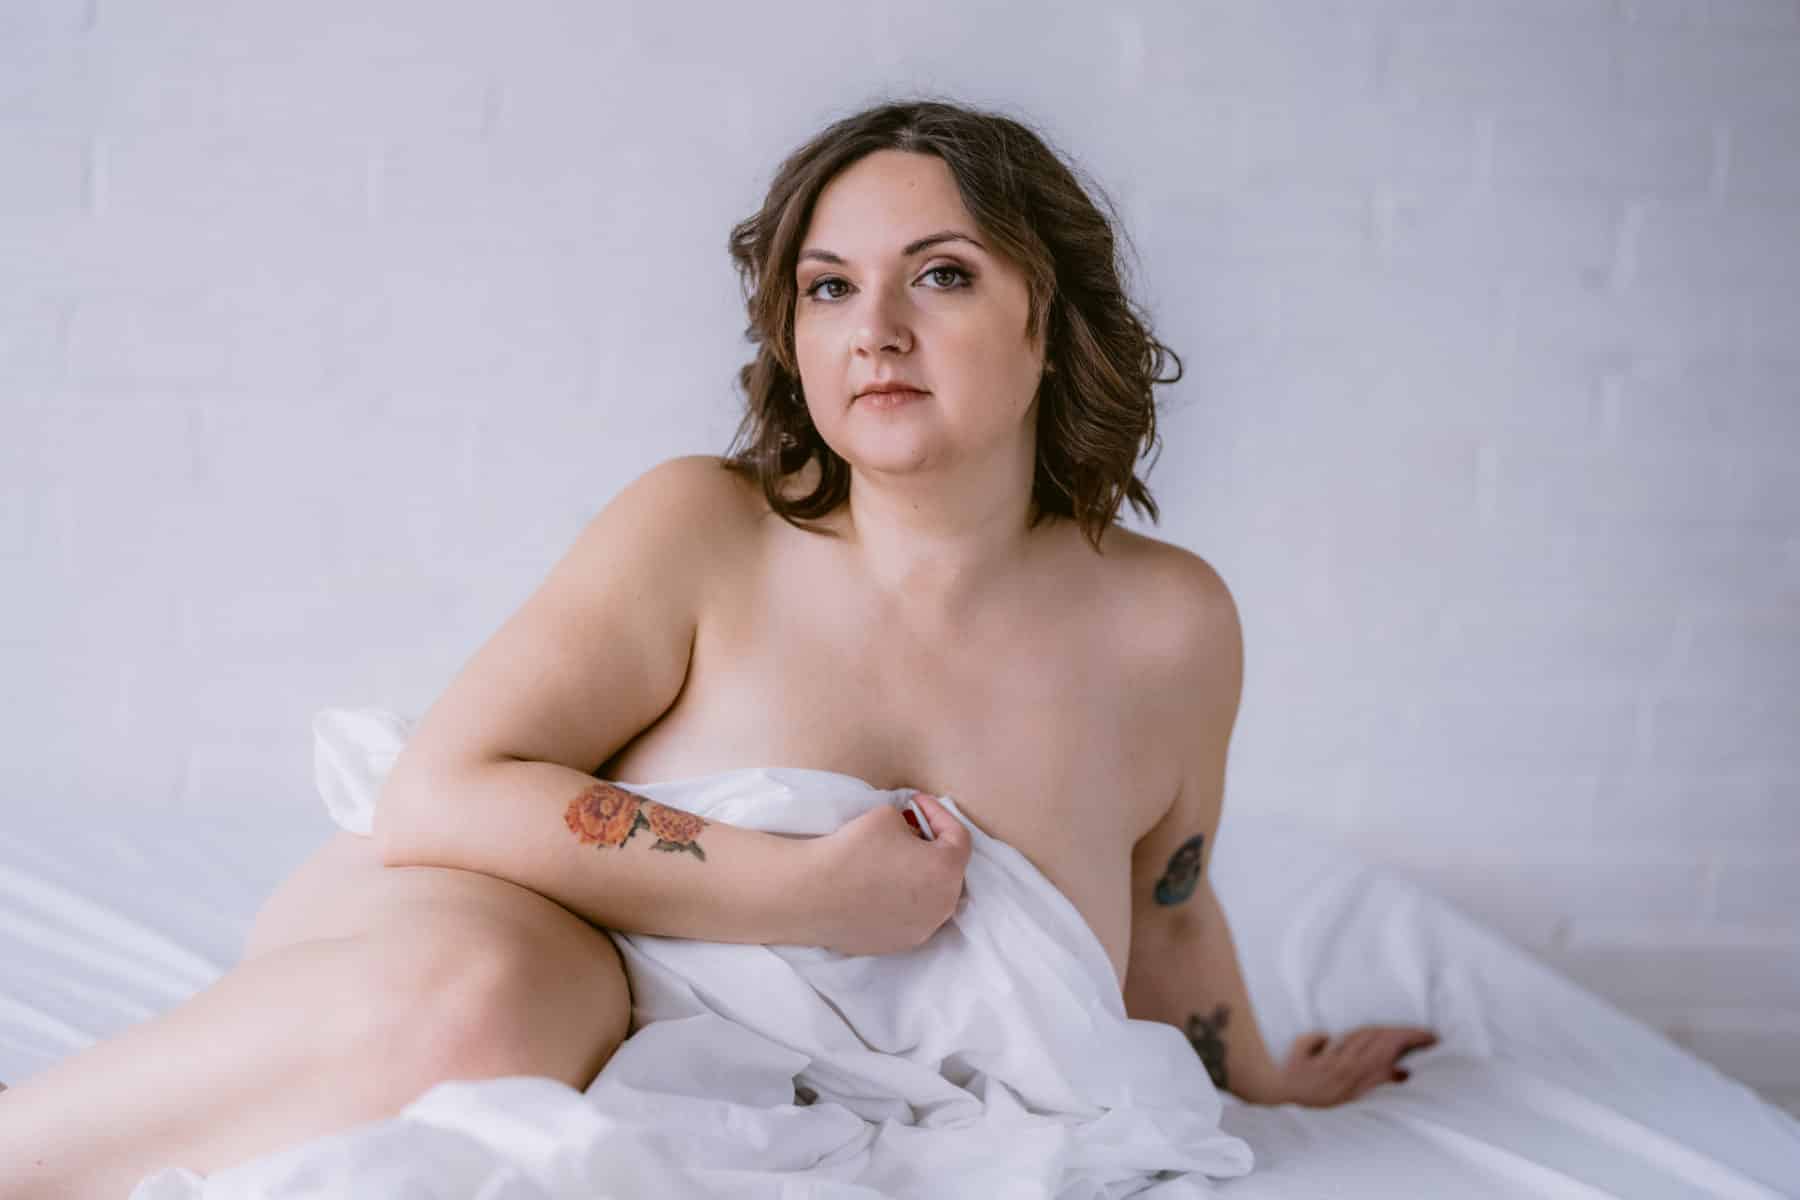 Implied nude photo with white bedding